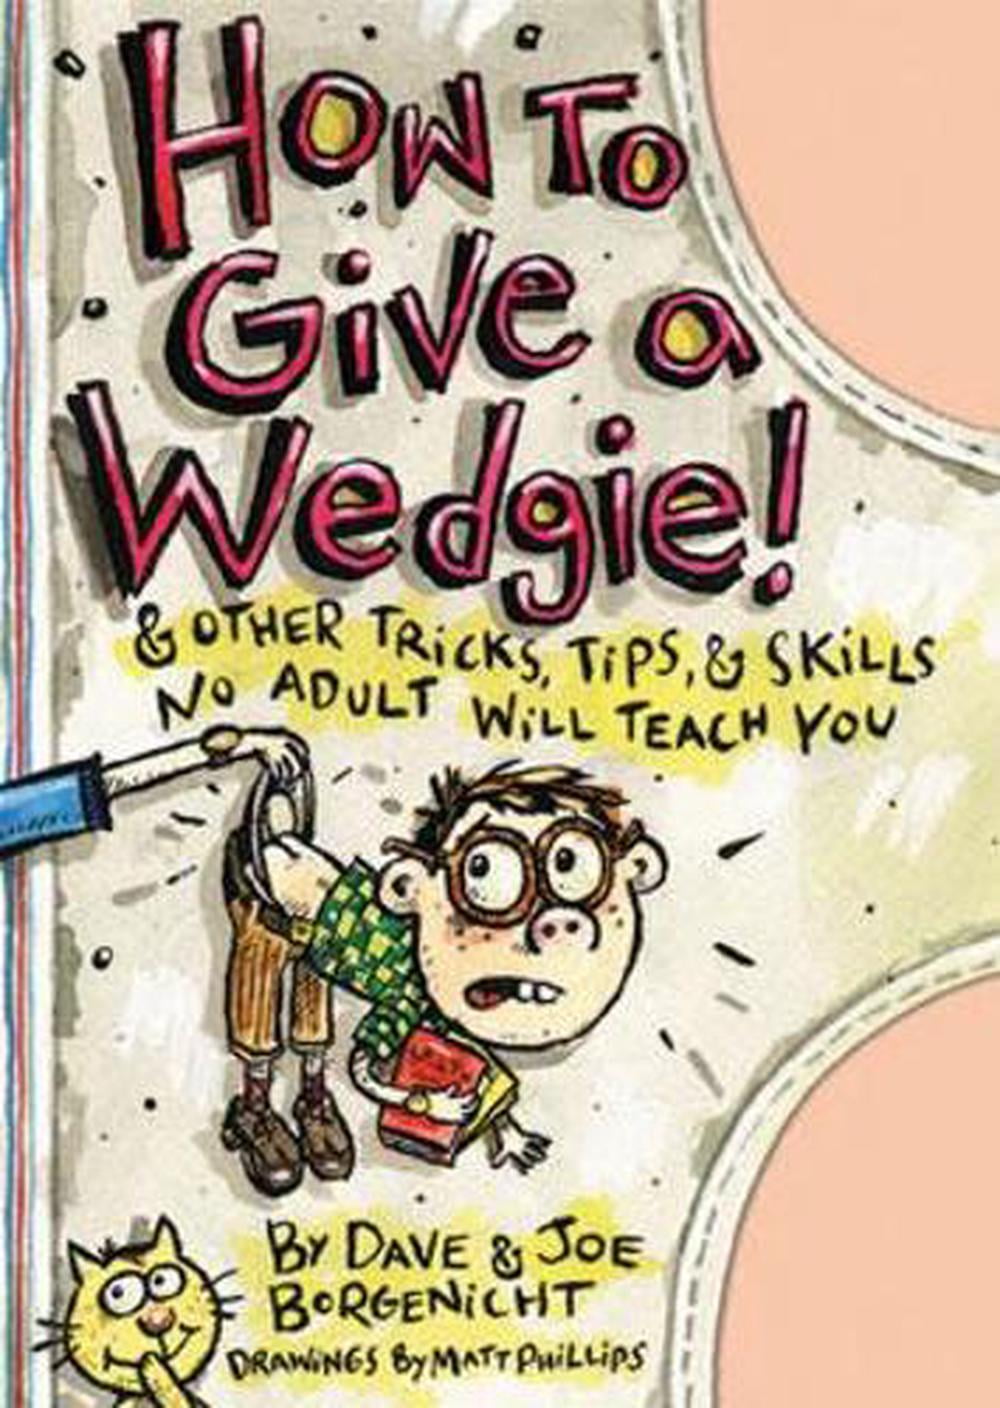 How to Give a Wedgie! : And Other ...